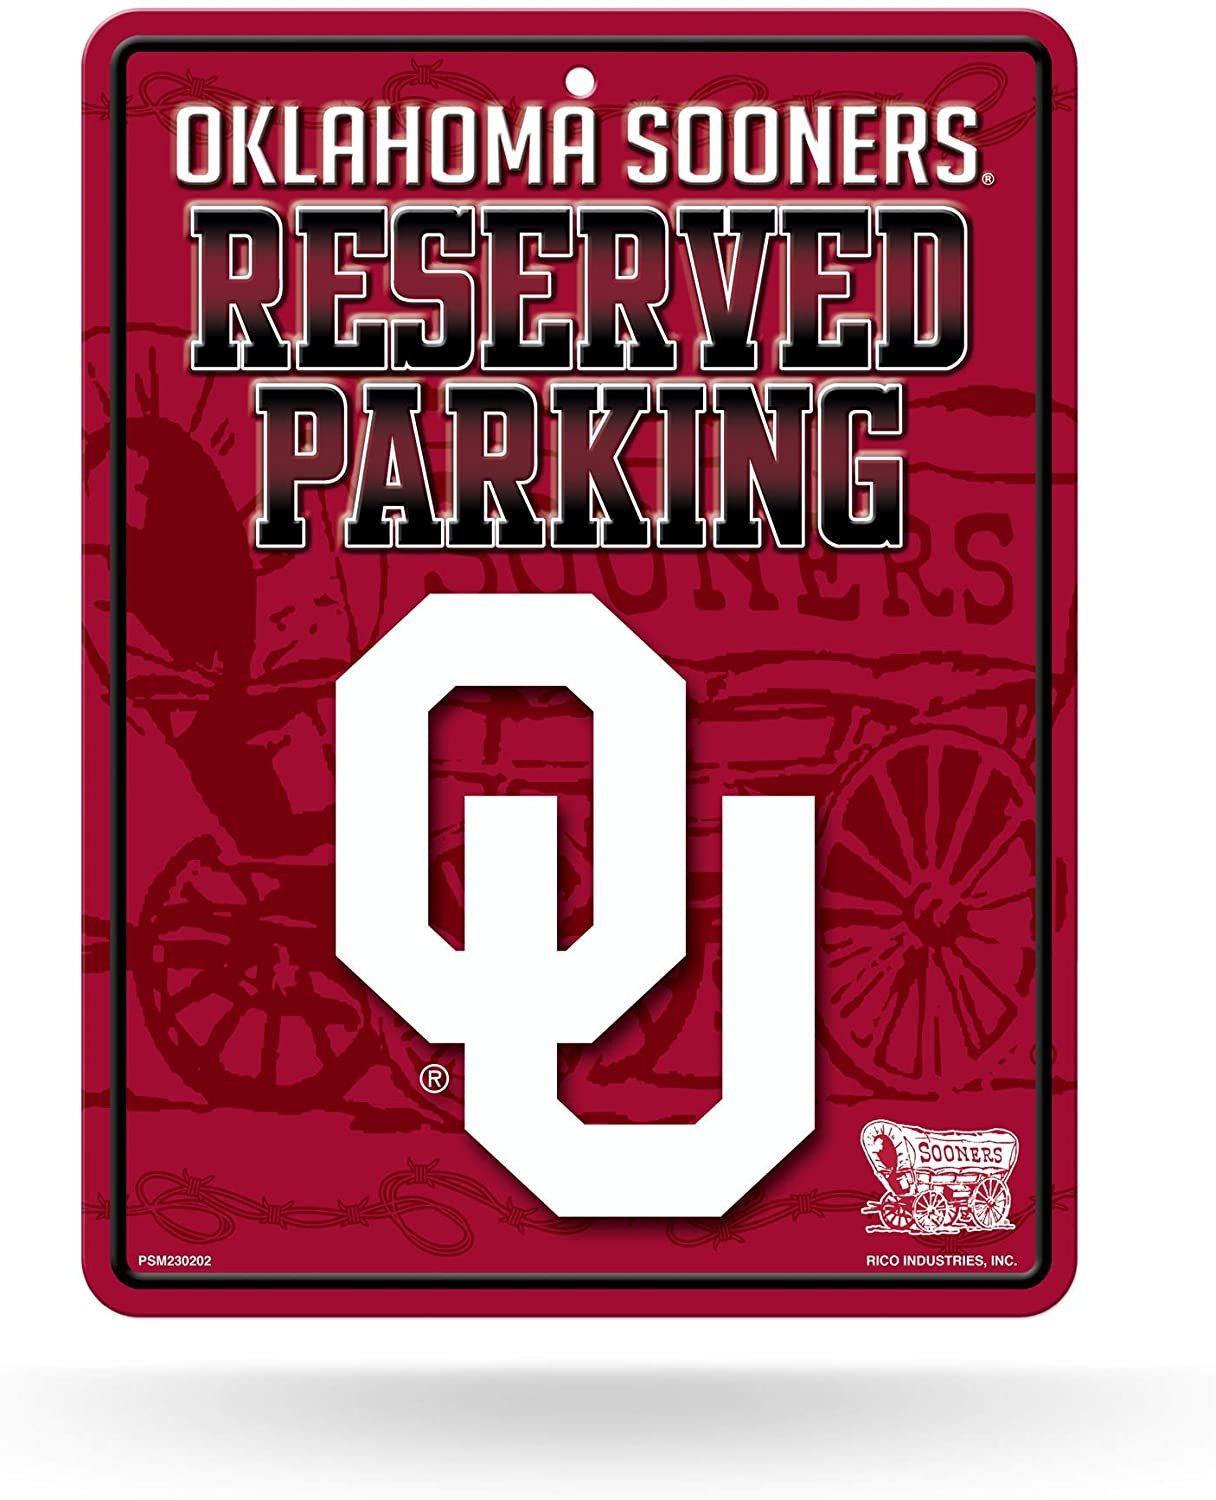 University of Oklahoma Sooners 8-Inch by 11-Inch Metal Parking Sign Decor